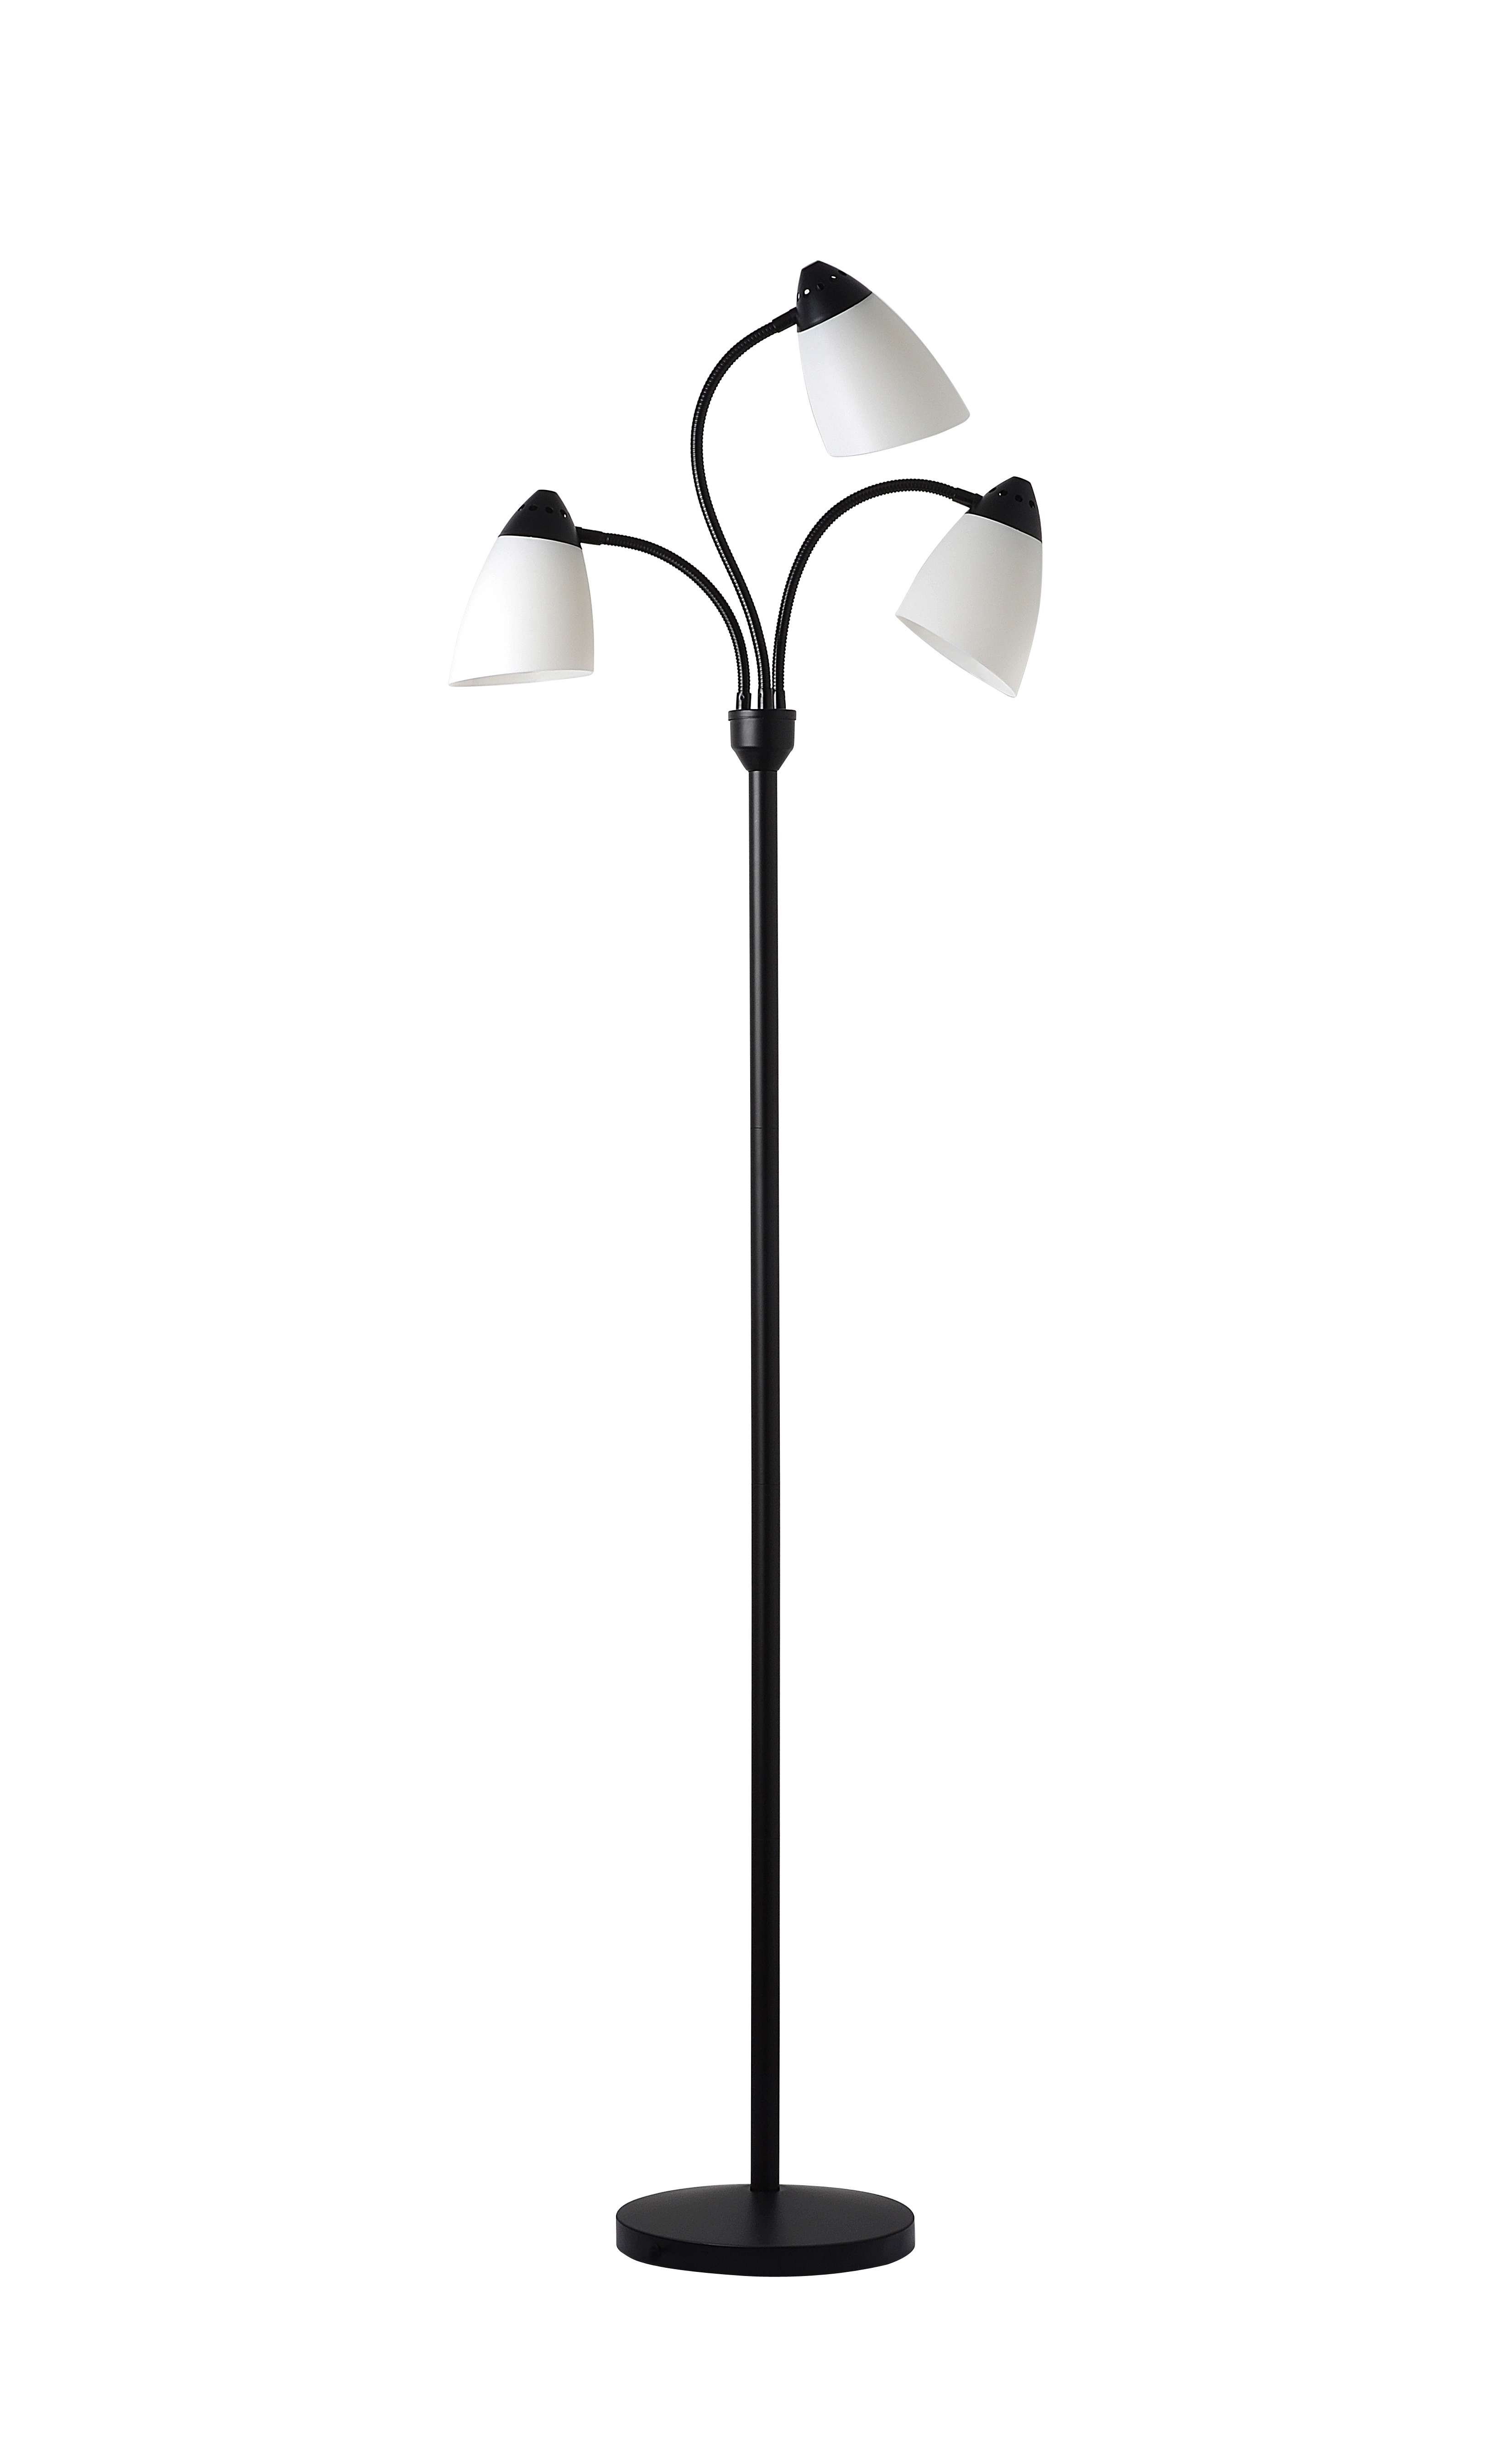 Mainstays 3 Head Adjustable Floor Lamp, Black with White Plastic Shades, Classic, Young Adult, Adult use. - image 1 of 10